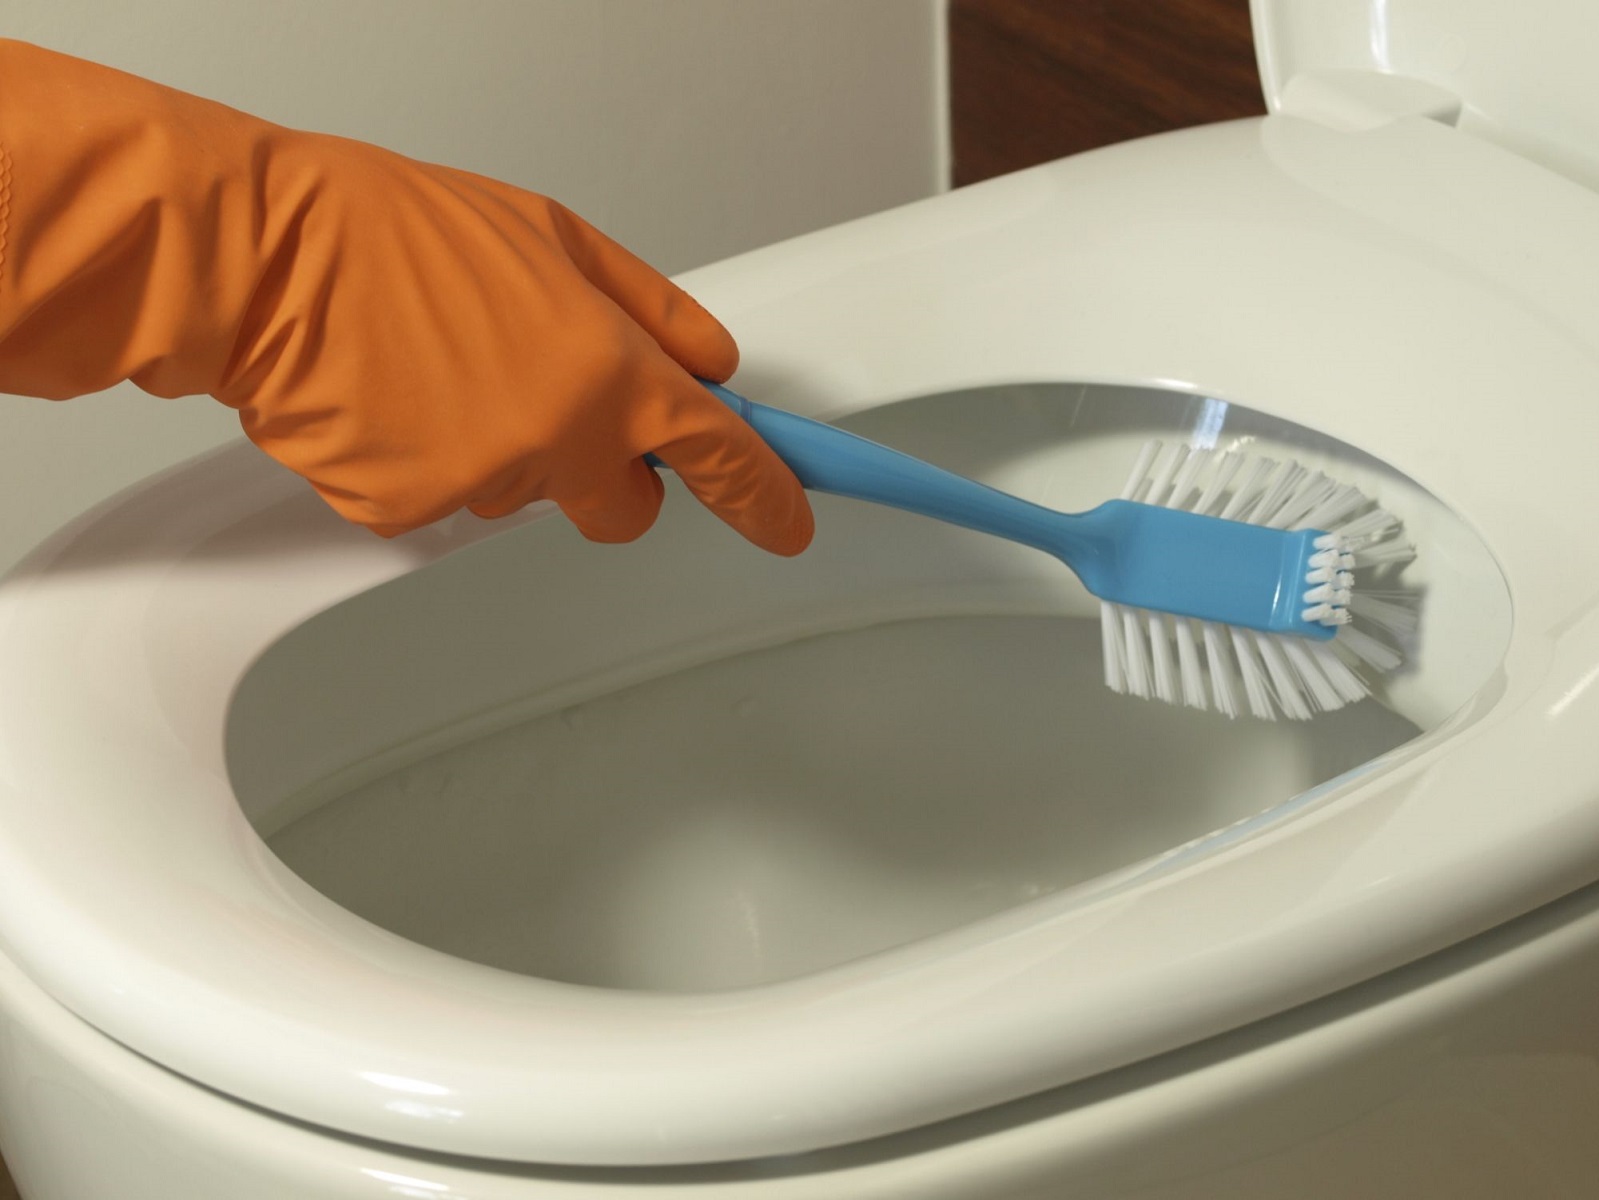 How To Remove Urine Stains From Toilet Bowl